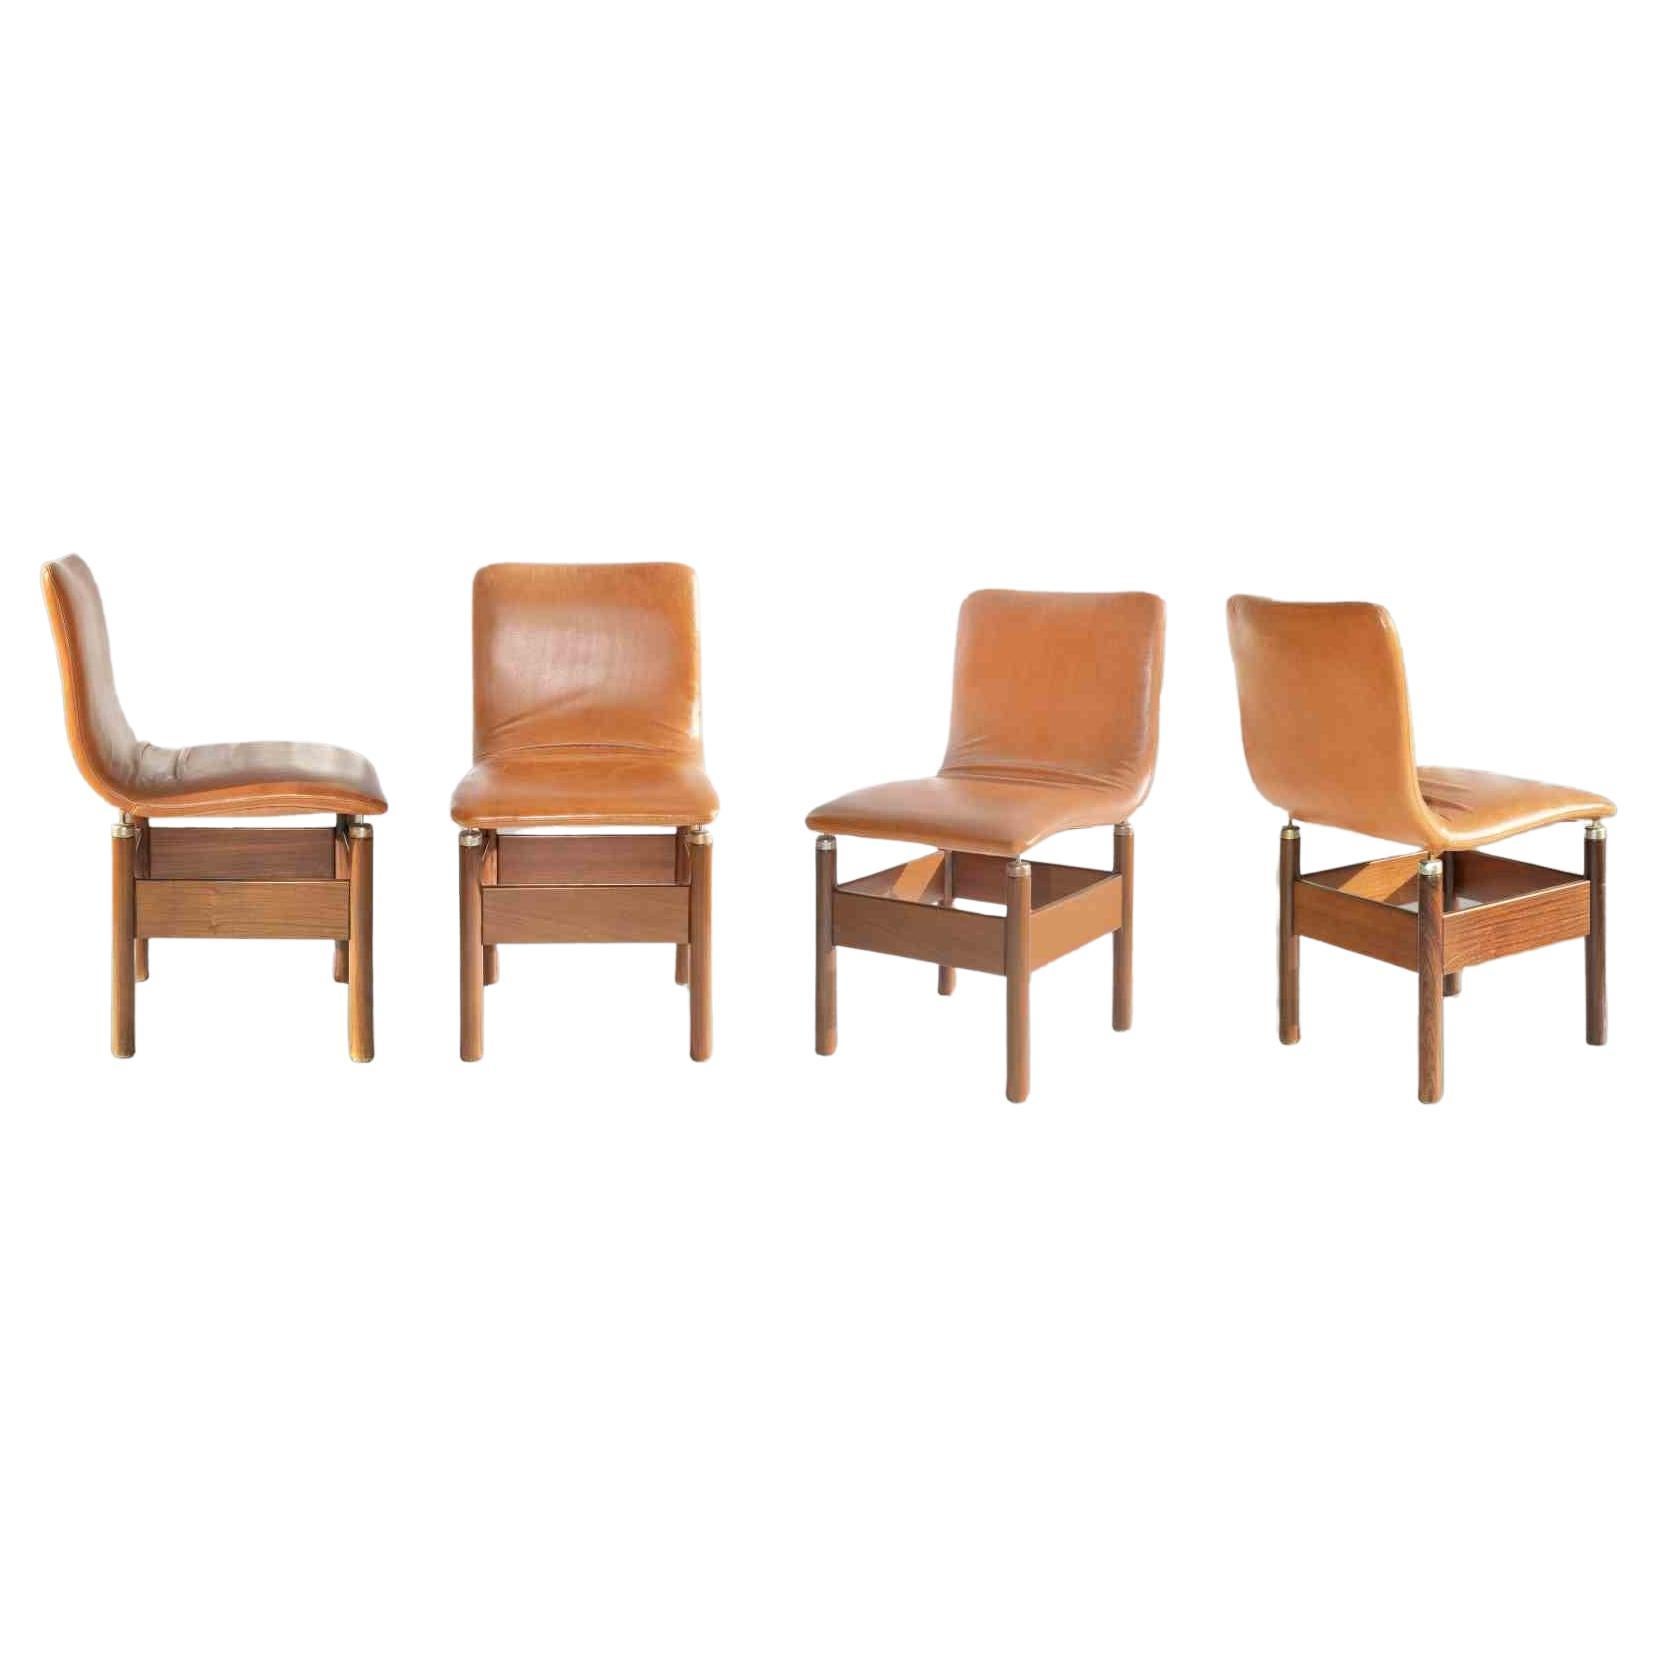 Set of 4 Chelsea Chairs by Vittorio Introini for Saporiti, 1966